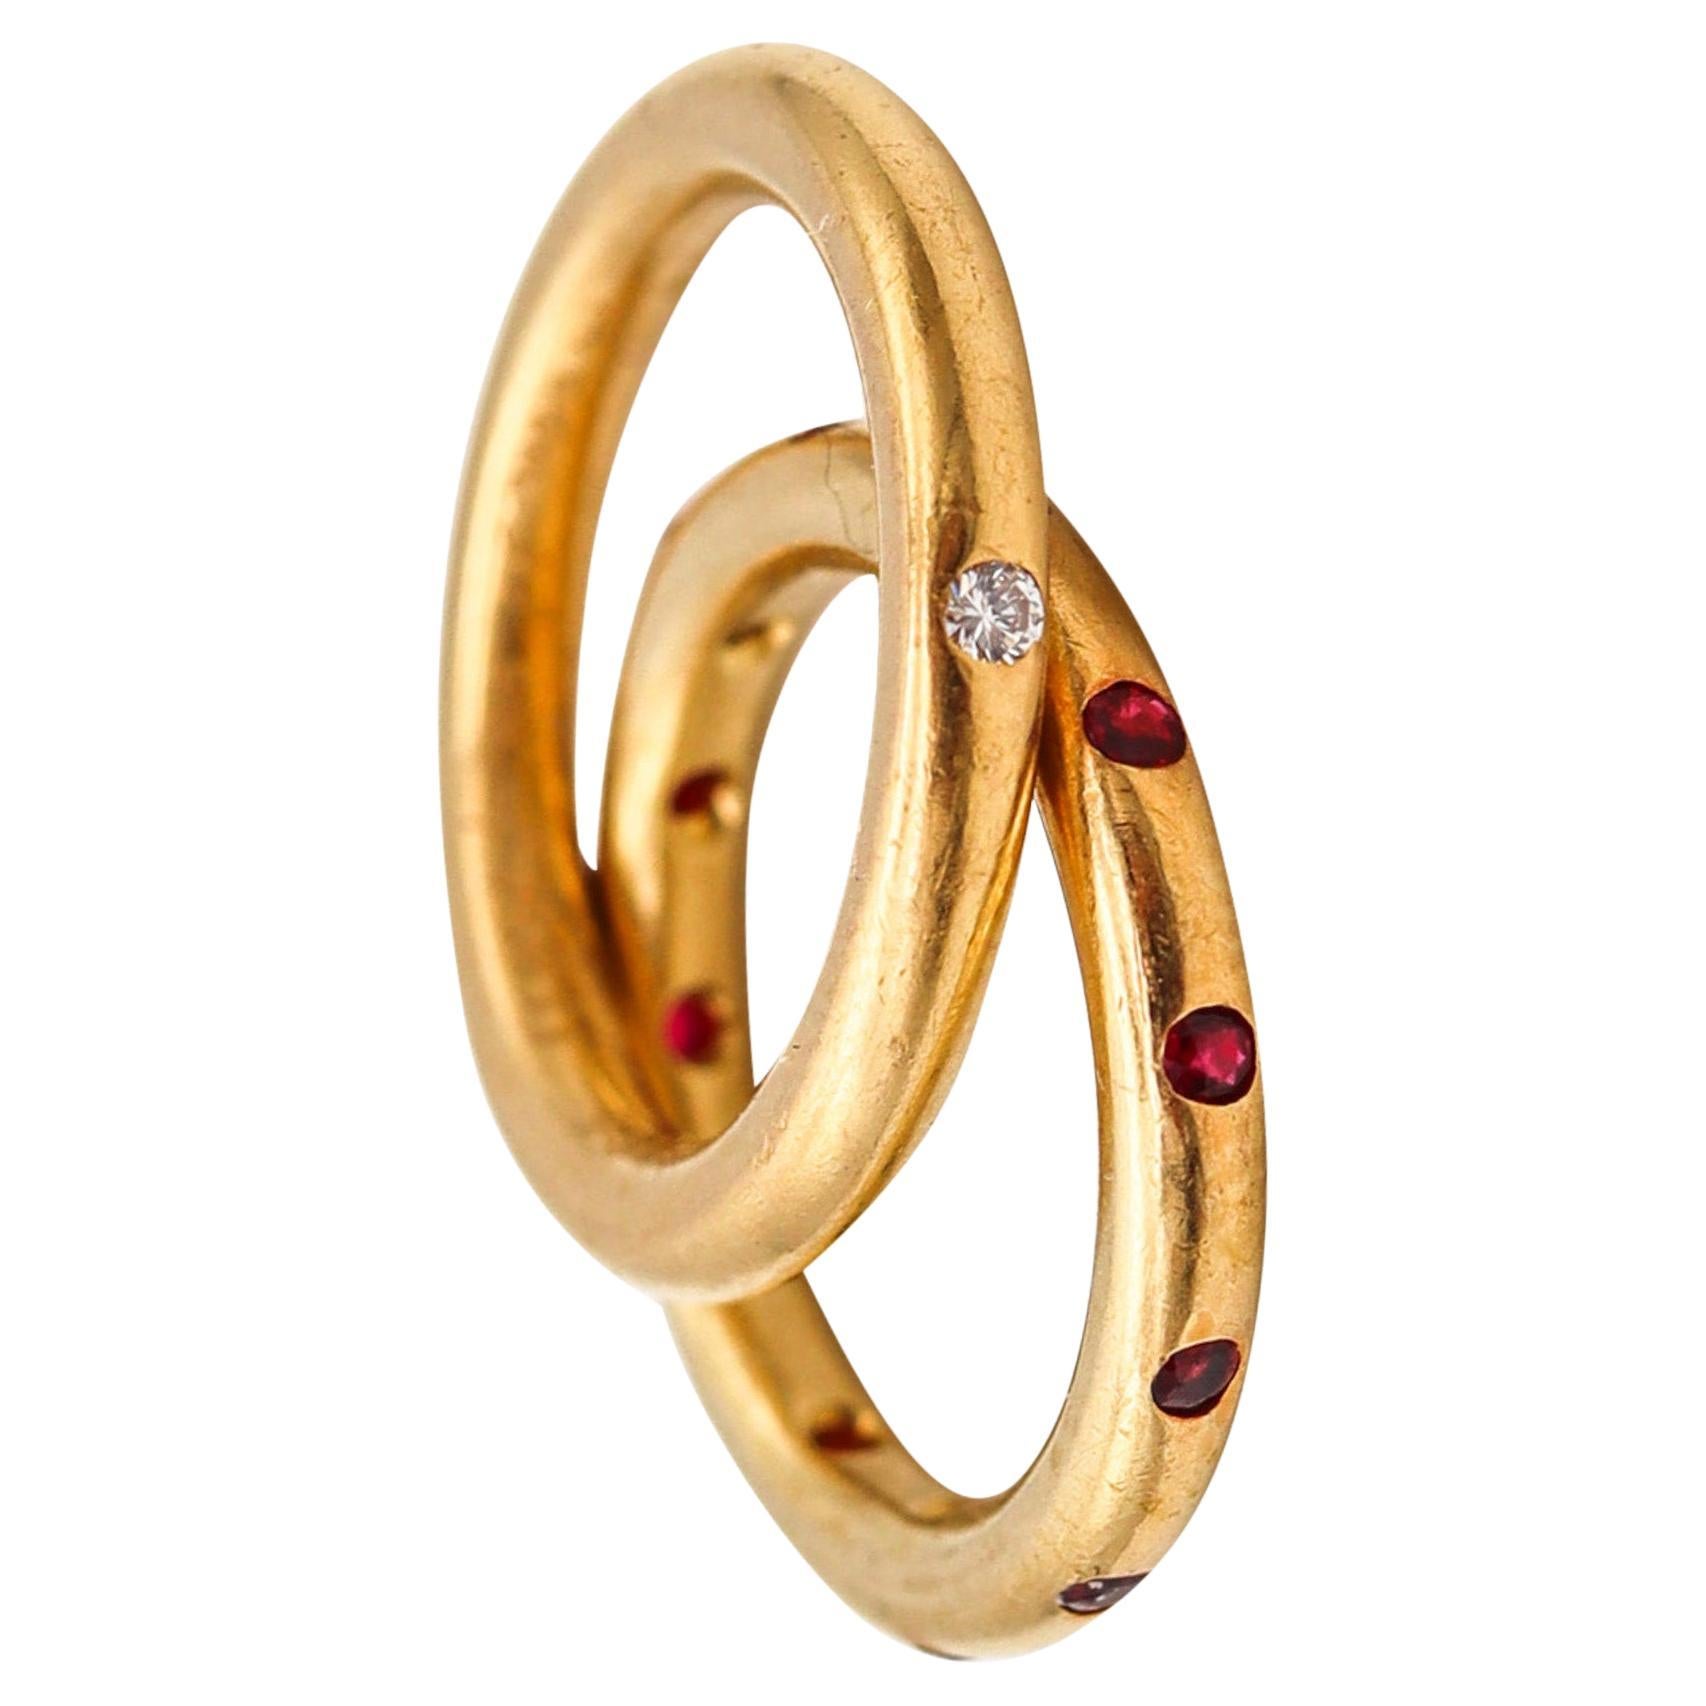 Reinstein Ross Stackable Duo Rings In 22Kt Yellow Gold With Rubies and a Diamond For Sale